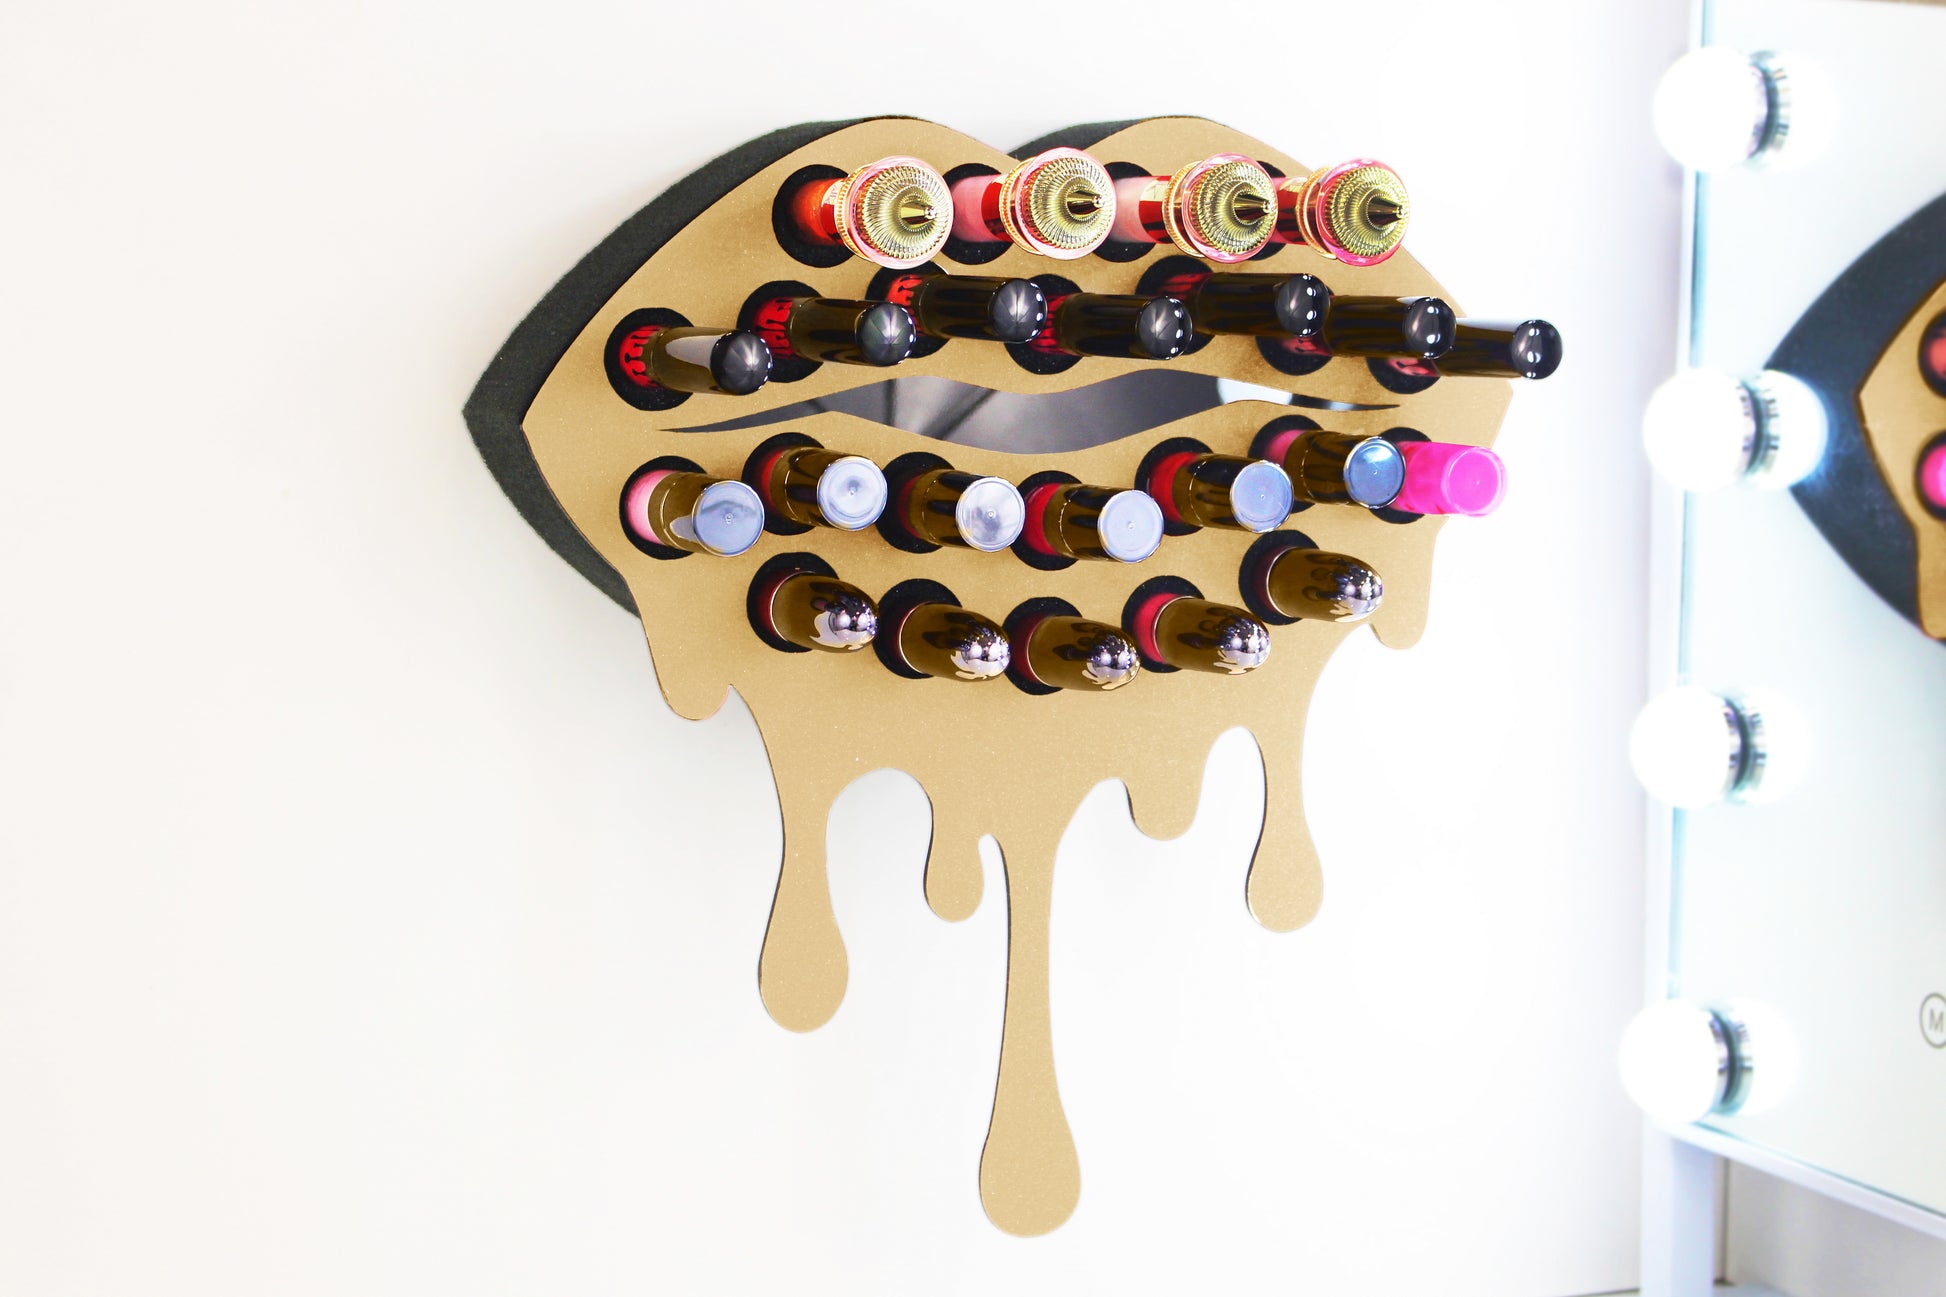 Gold Medium Lip Design Lipstick Organizer holding 23 lipsticks mounted on the wall, keeping lipstick organized and easy to reach. This wall mounted makeup organizer looks like art on the wall of your bathroom or makeup room.